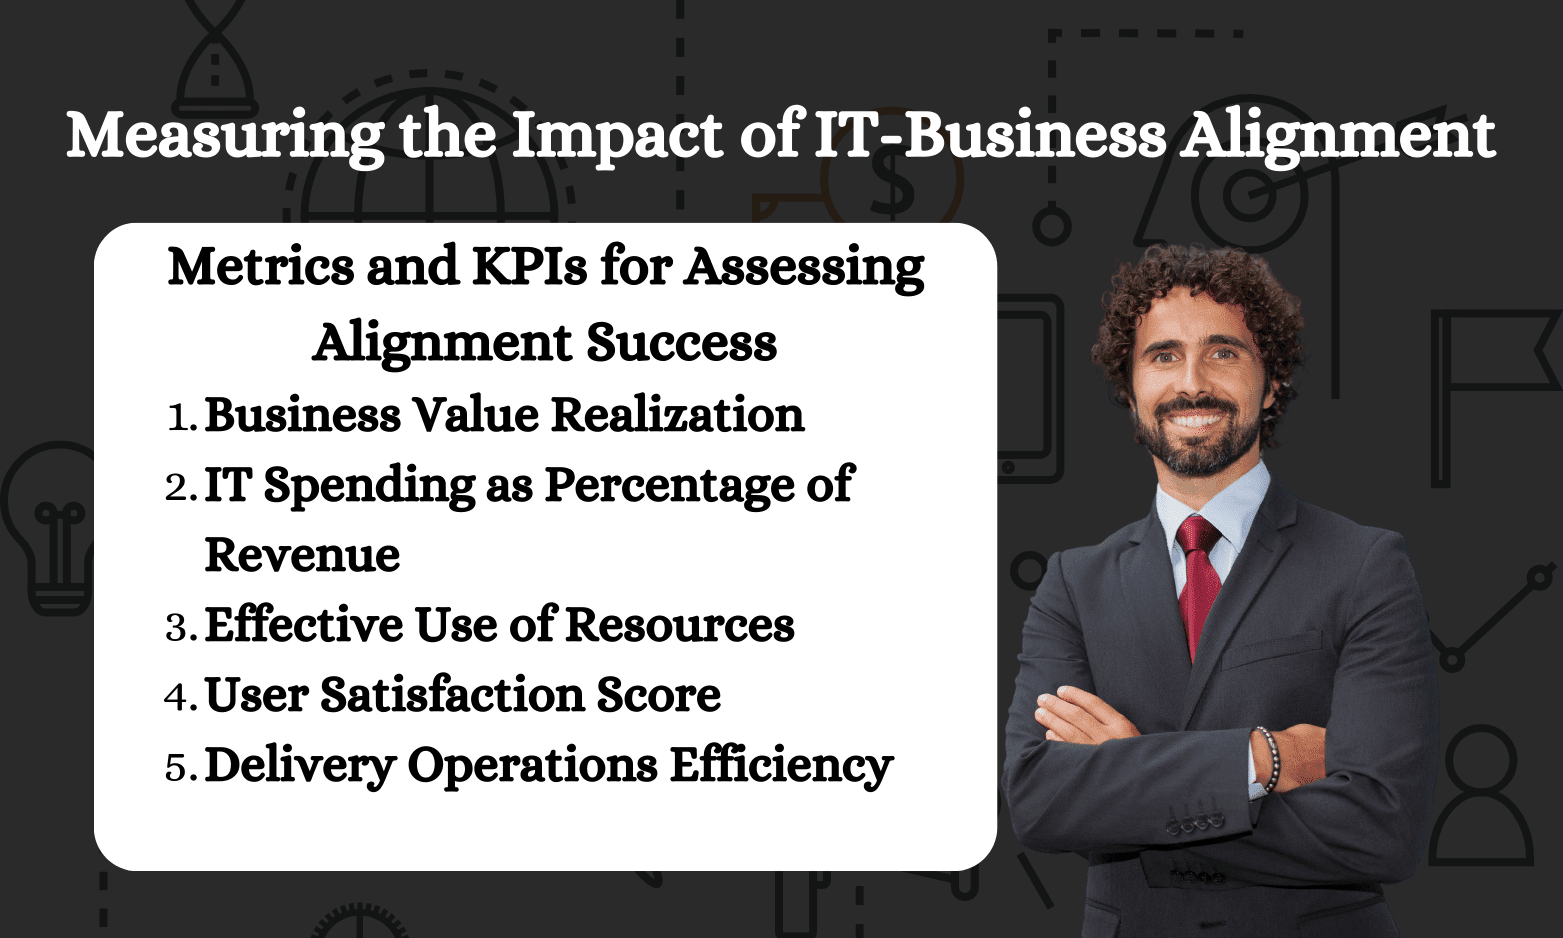 Metrics and KPIs for Assessing Alignment Success